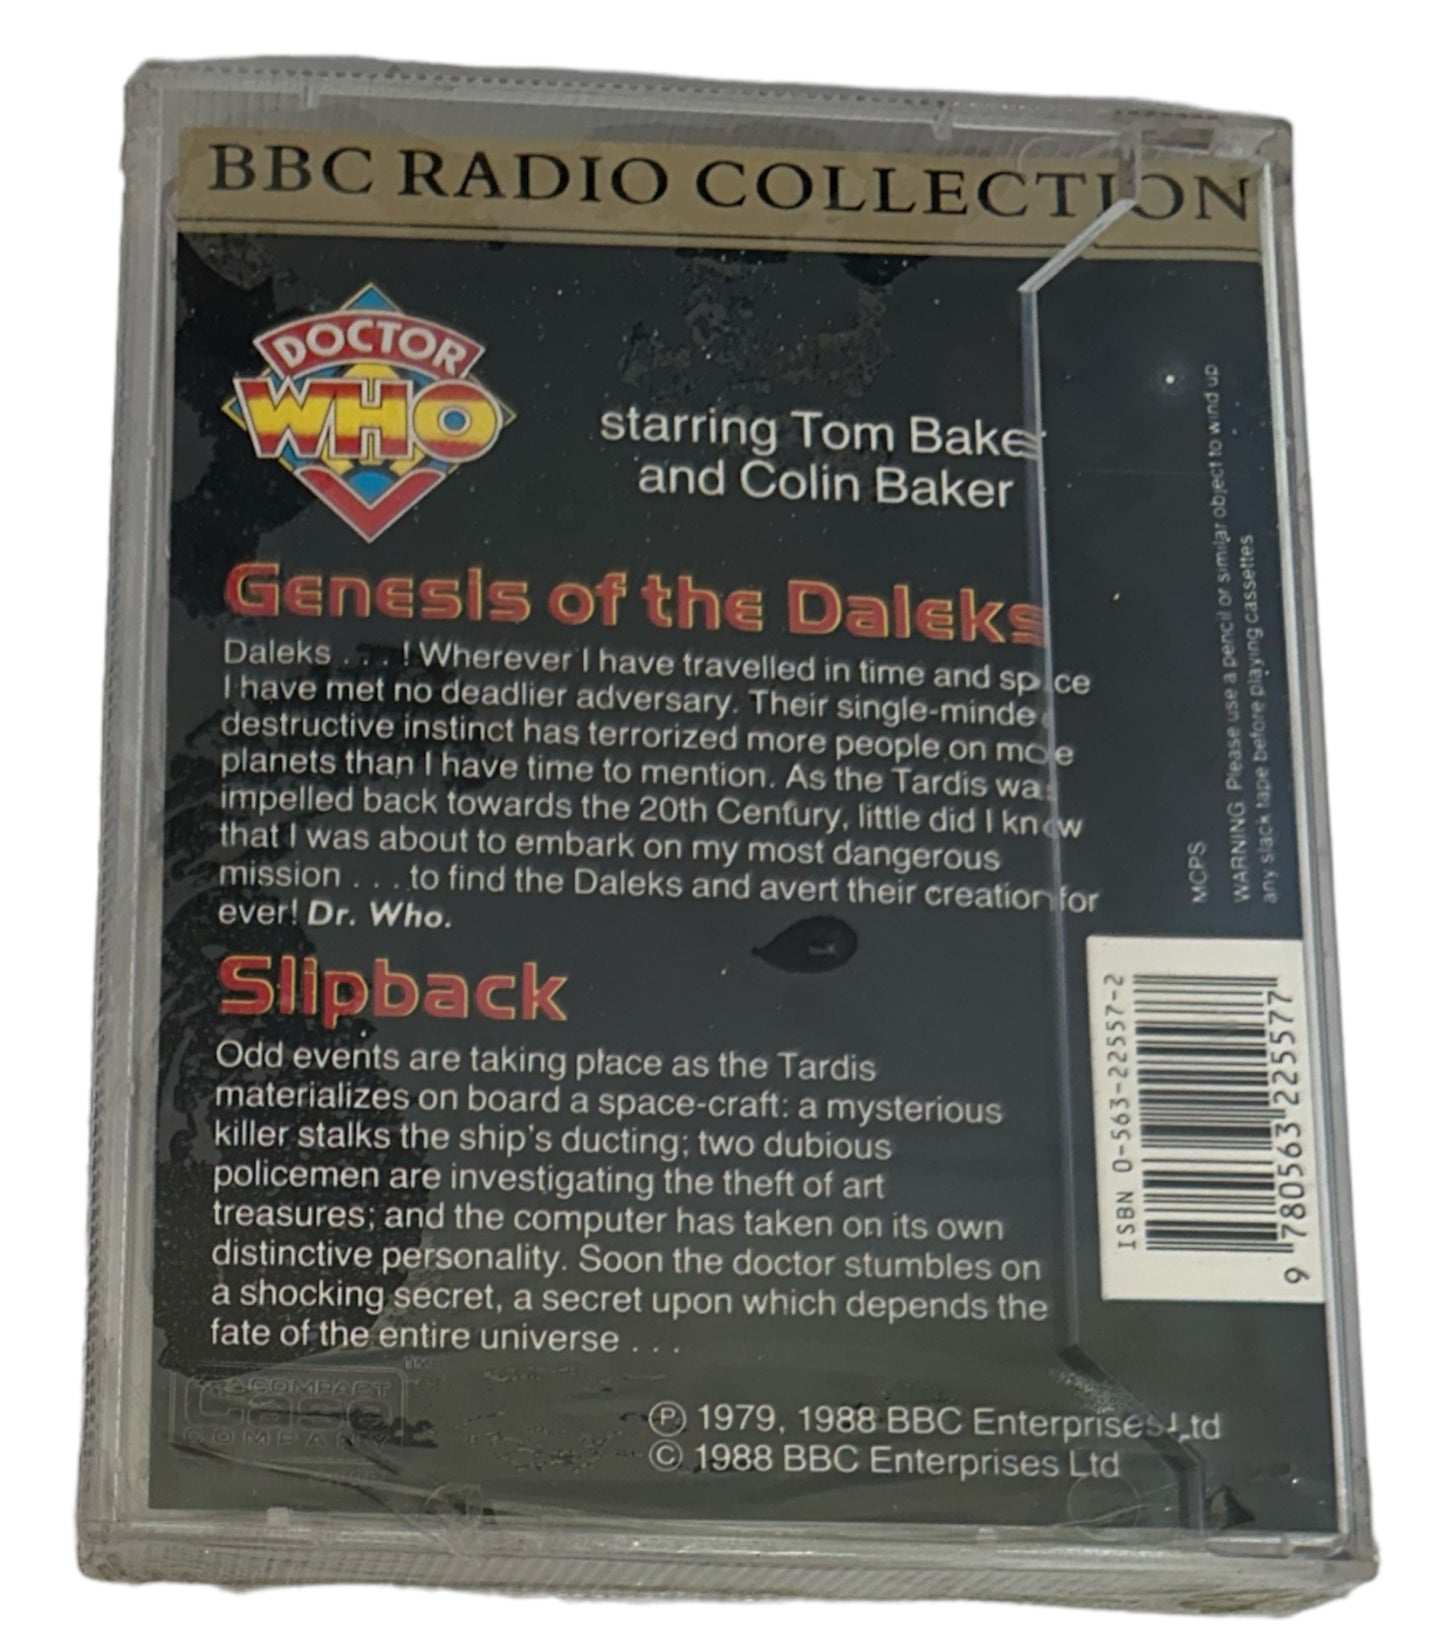 Vintage 1988 BBC Radio Collection - Doctor Dr Who - Genesis Of The Daleks & Slipback Double Audio Cassette Set - Factory Sealed Shop Stock Room Find